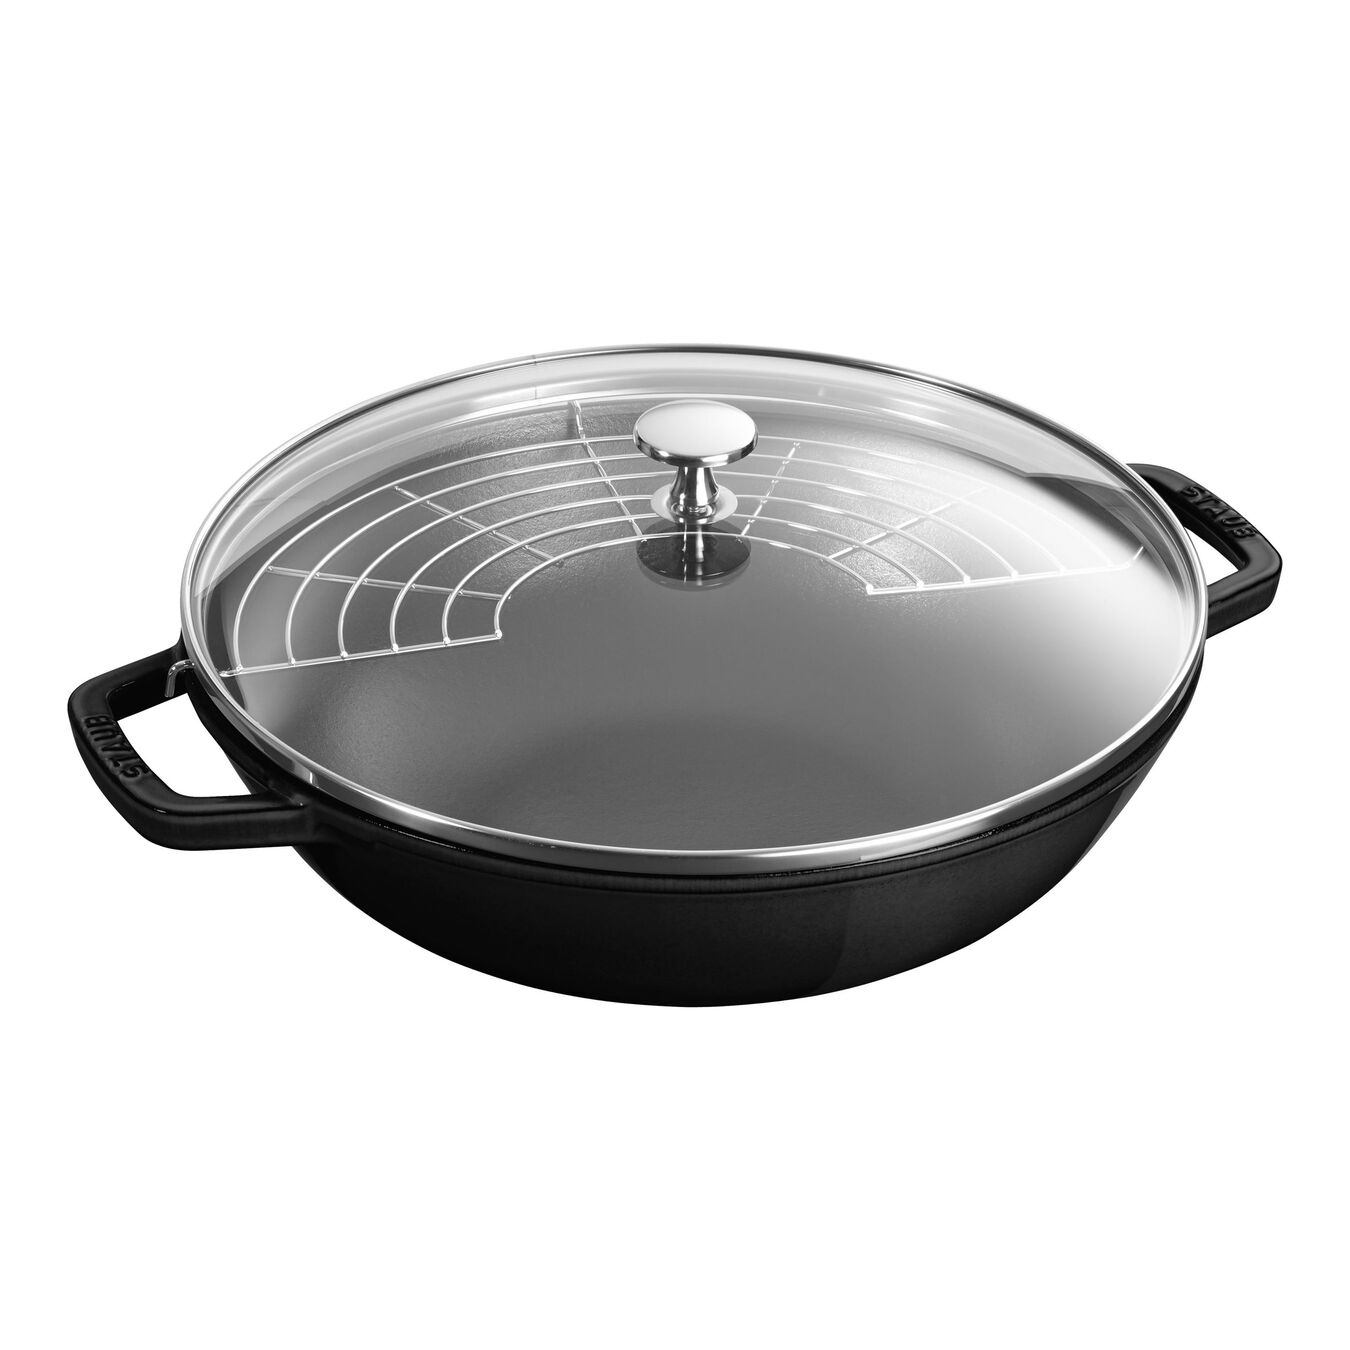 30 cm / 12 inch cast iron Wok with glass lid, black,,large 1